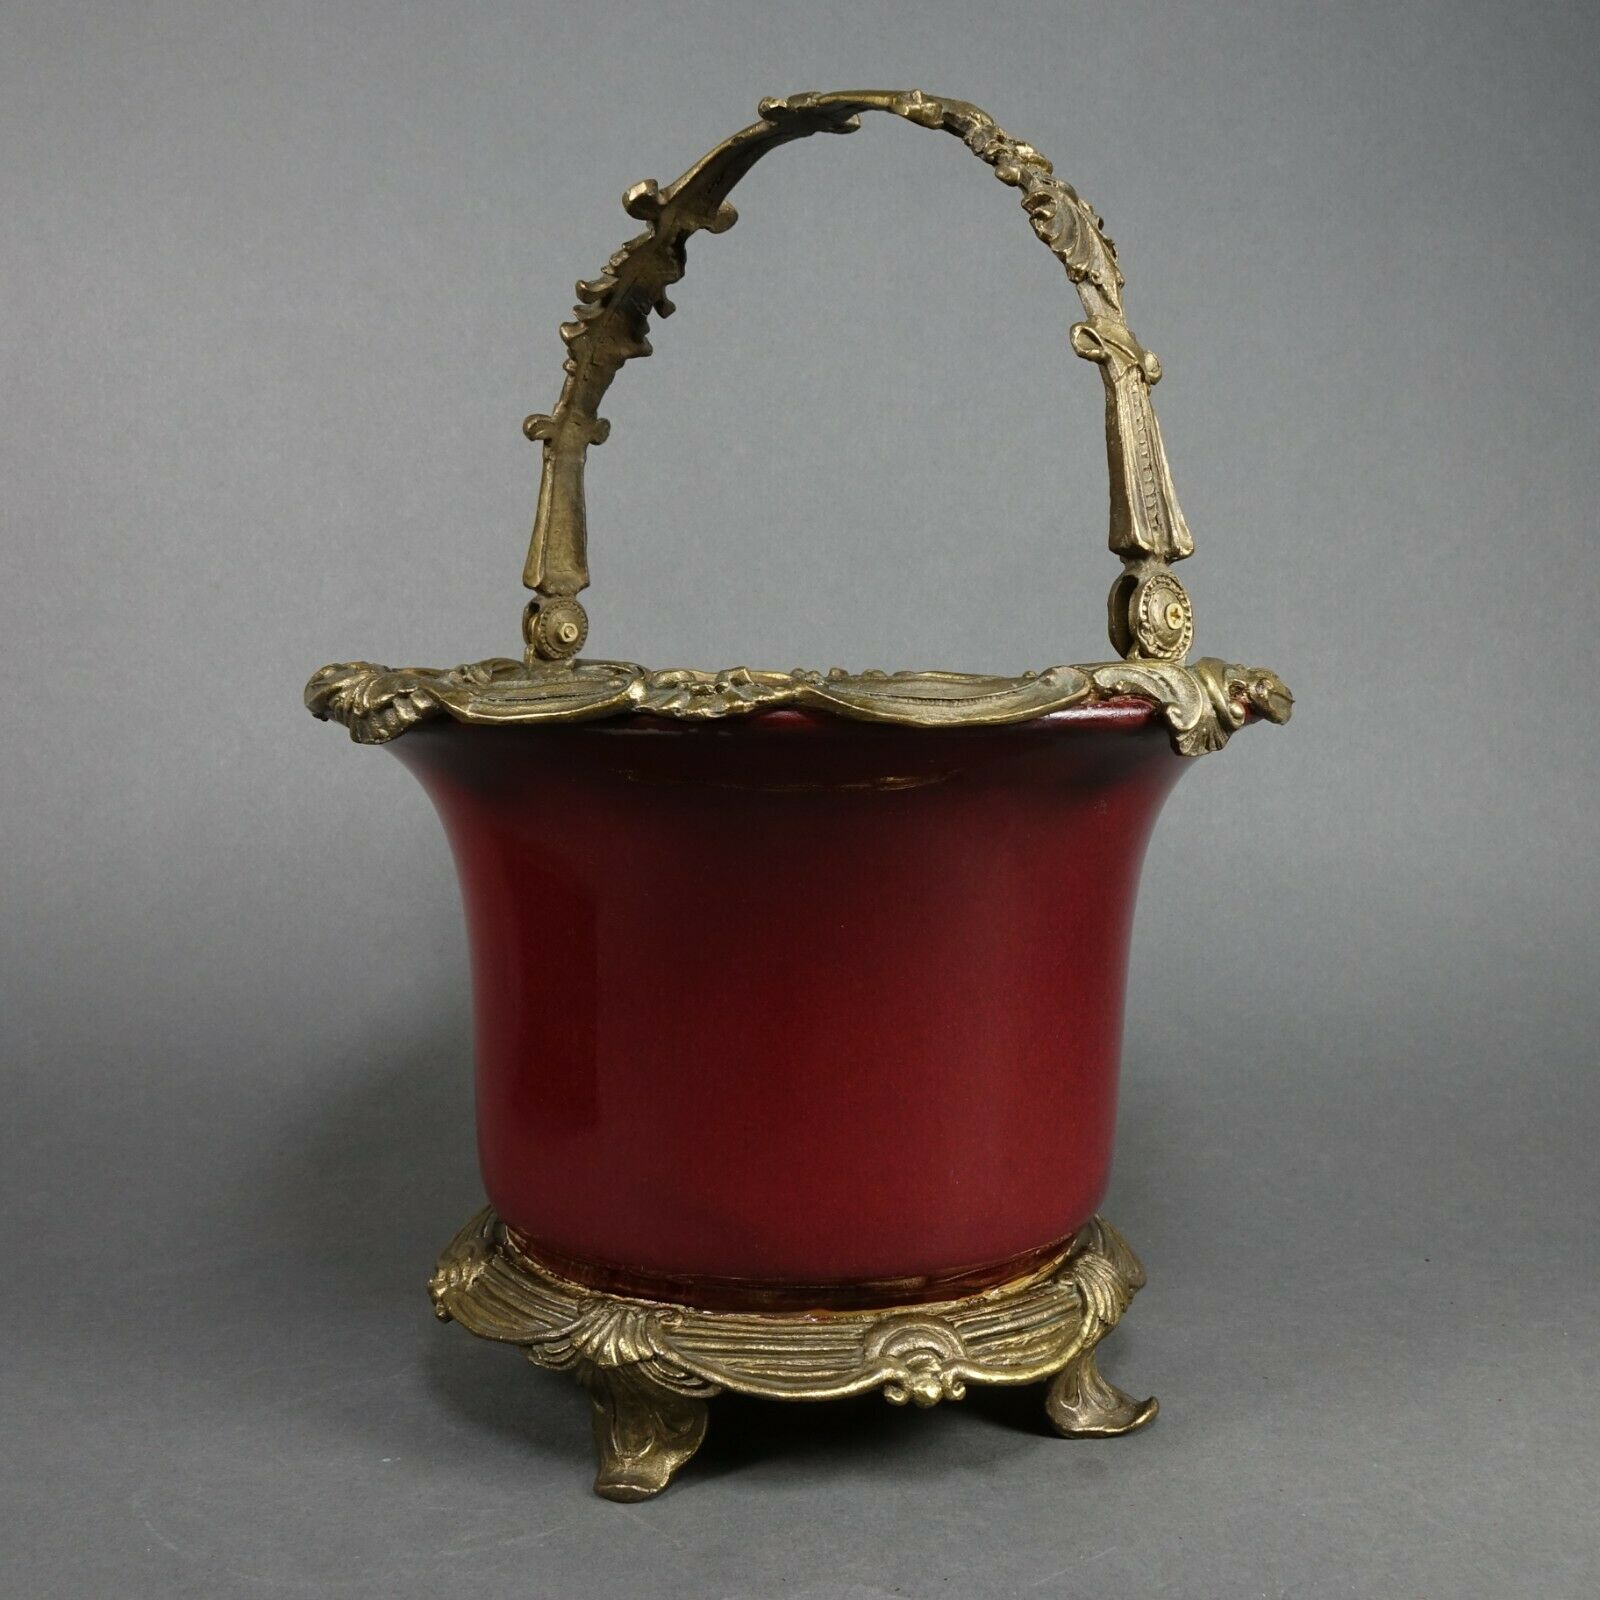 Vintage Ceramic Red Porcelain Brass Footed And Ornate Brass Handle Ice Bucket